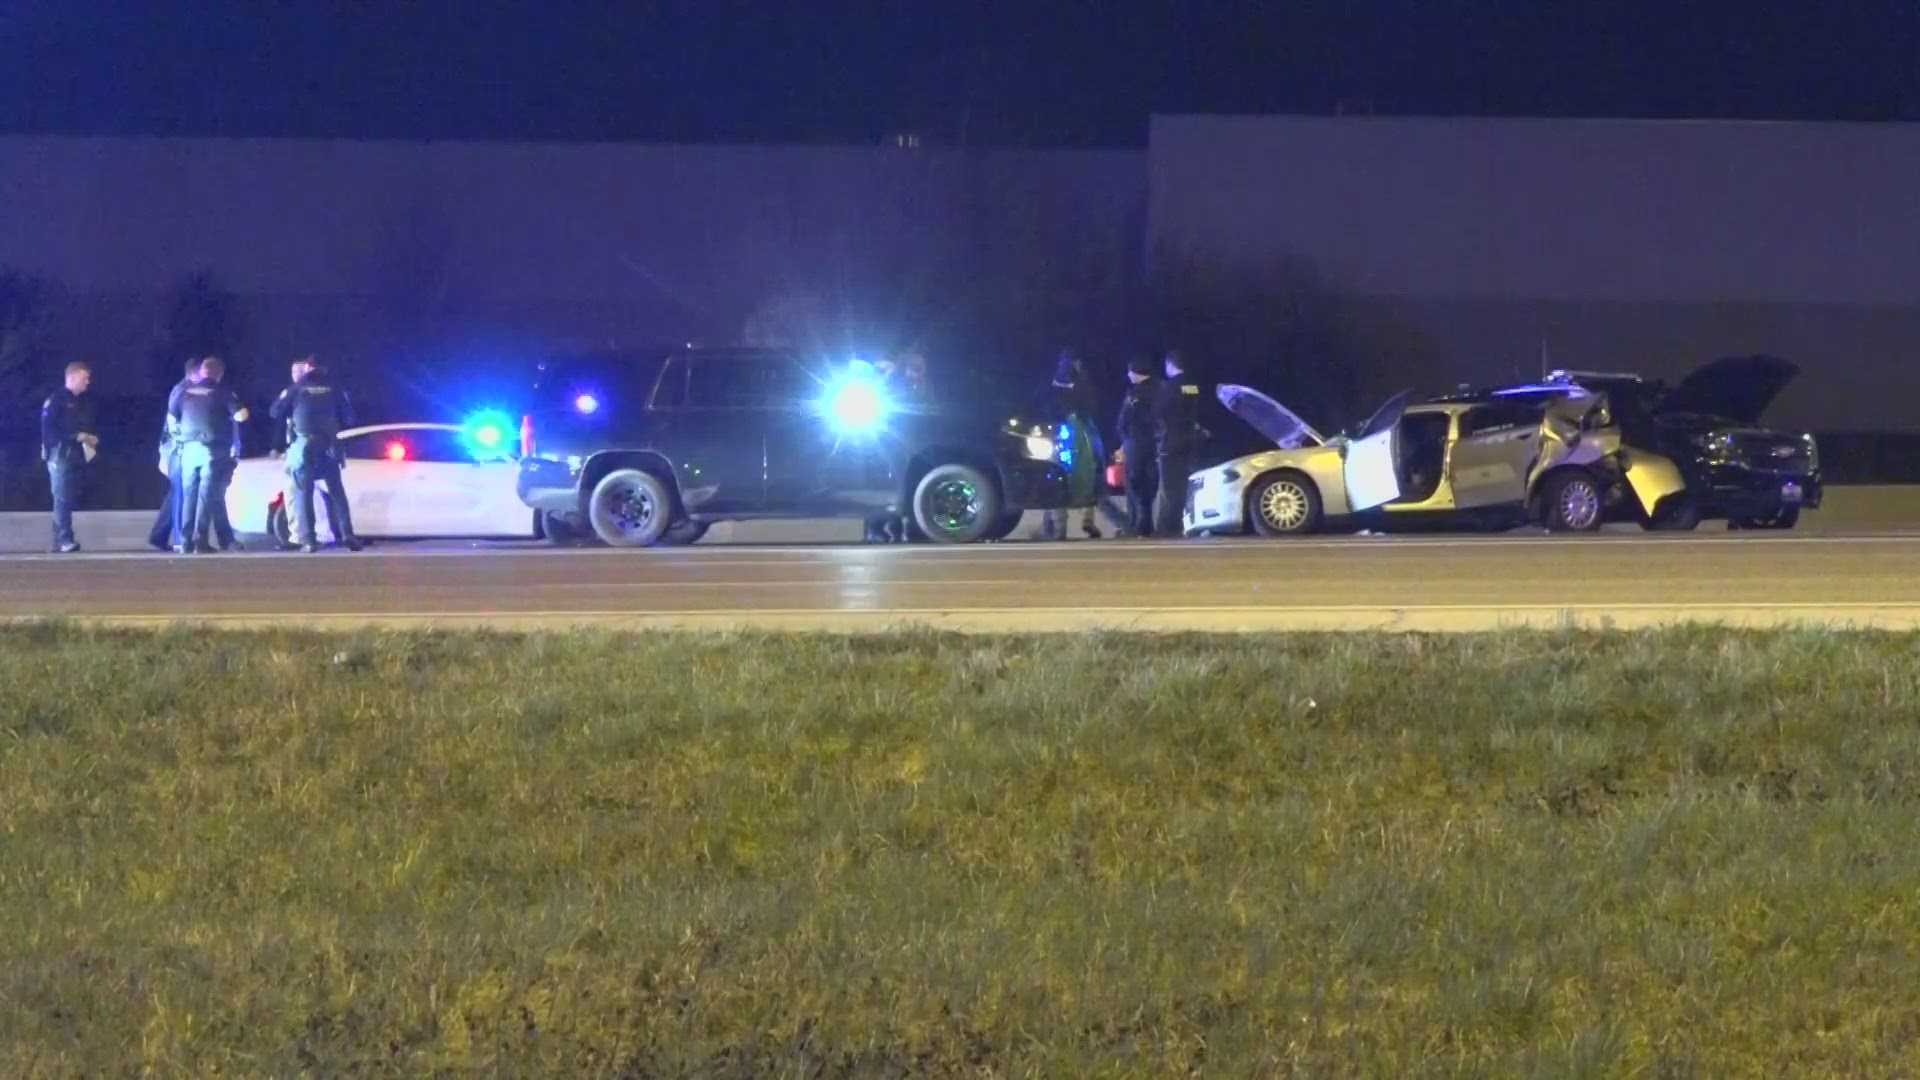 Three Lake St. Louis officers were seriously injured, and two St. Charles County deputies were moderately injured. They were investigating a prior police chase.